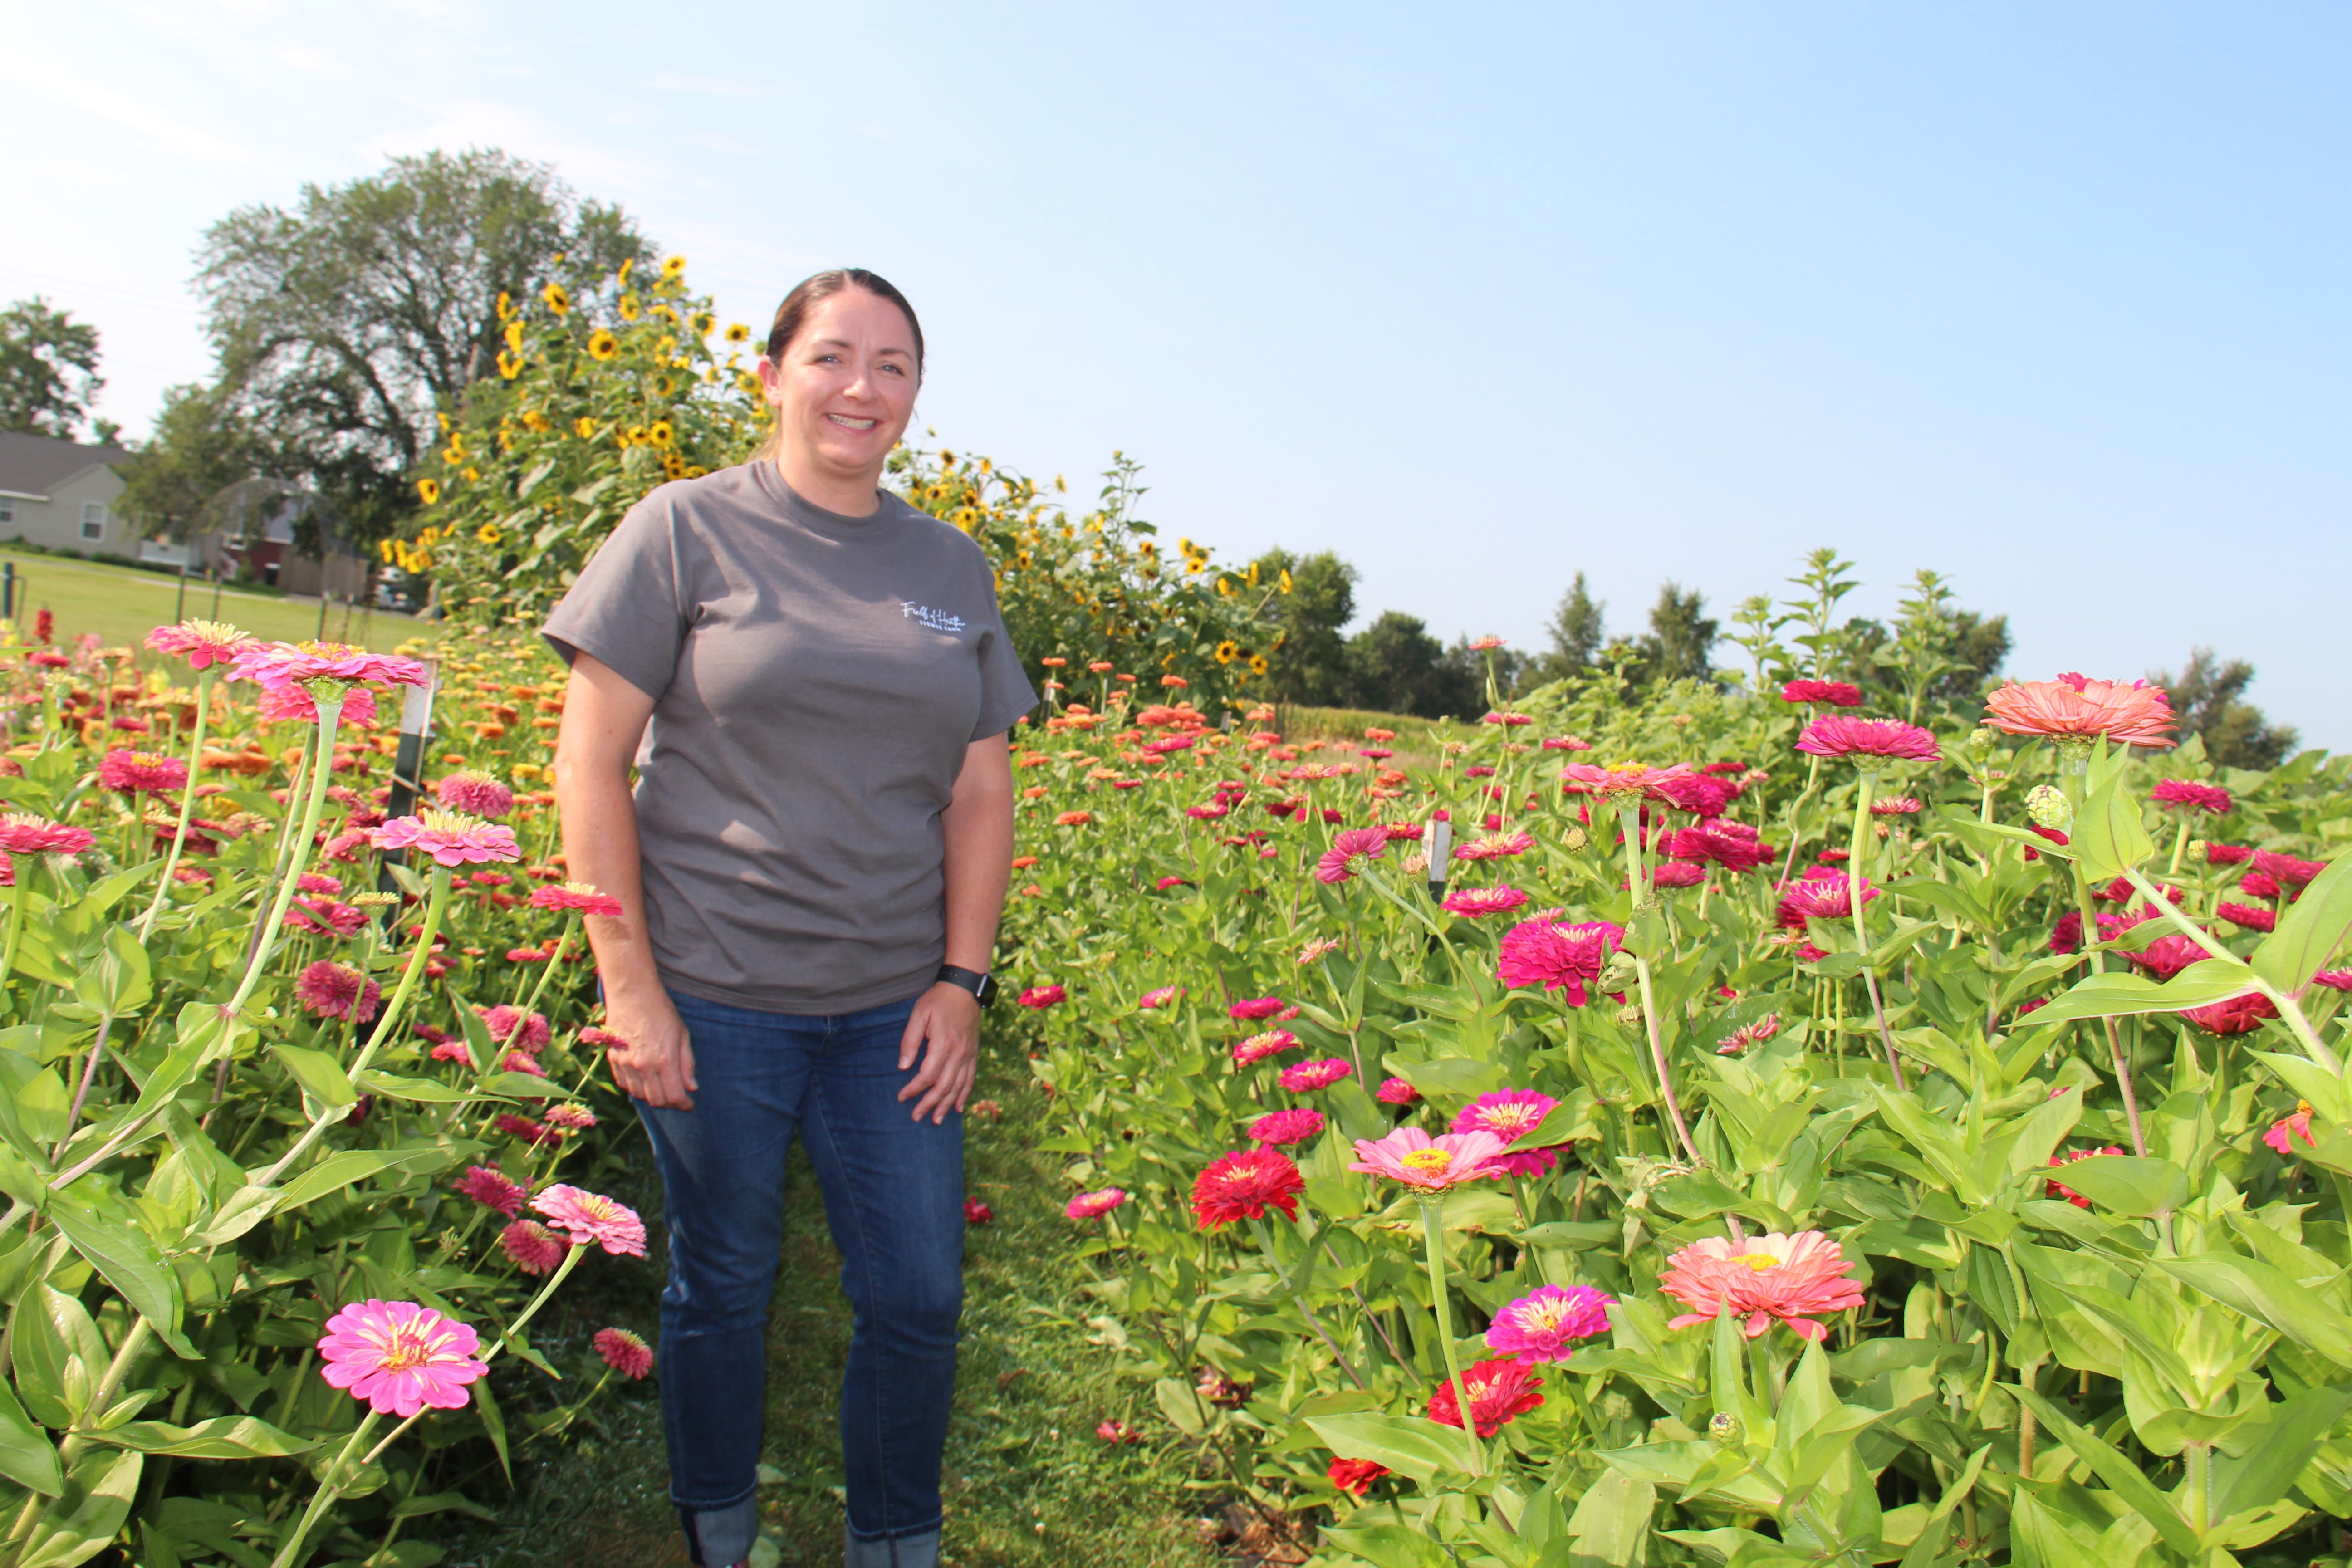 Heather Moore poses for a photo amid the zinnias growing at Fields of Heather Flower Farm in Perry.